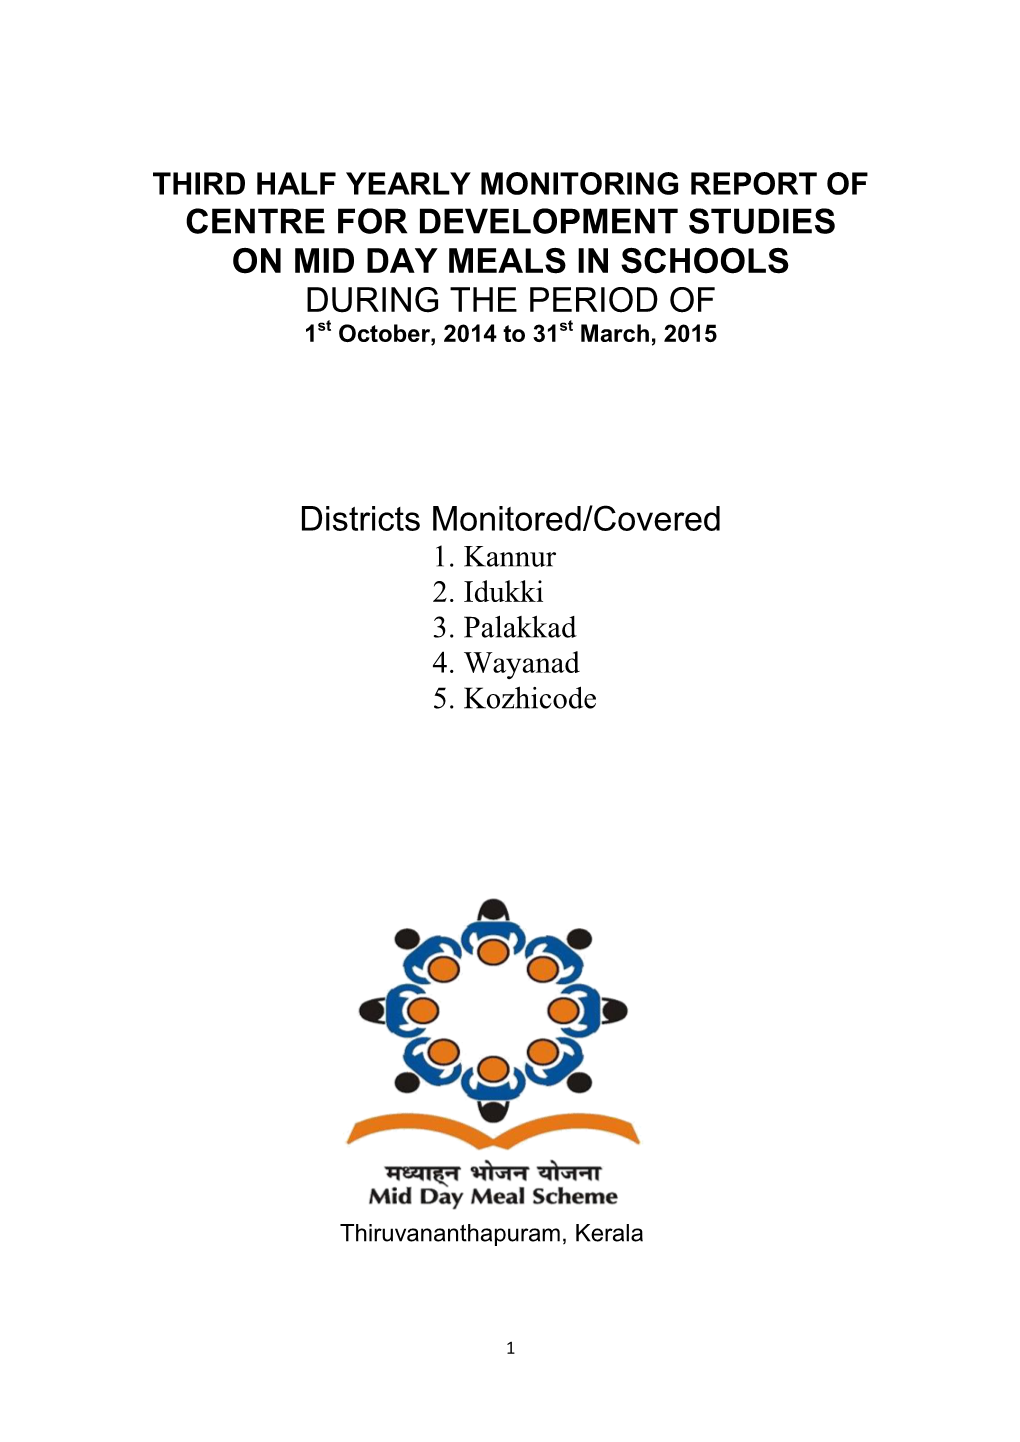 REPORT of CENTRE for DEVELOPMENT STUDIES on MID DAY MEALS in SCHOOLS DURING the PERIOD of 1St October, 2014 to 31St March, 2015